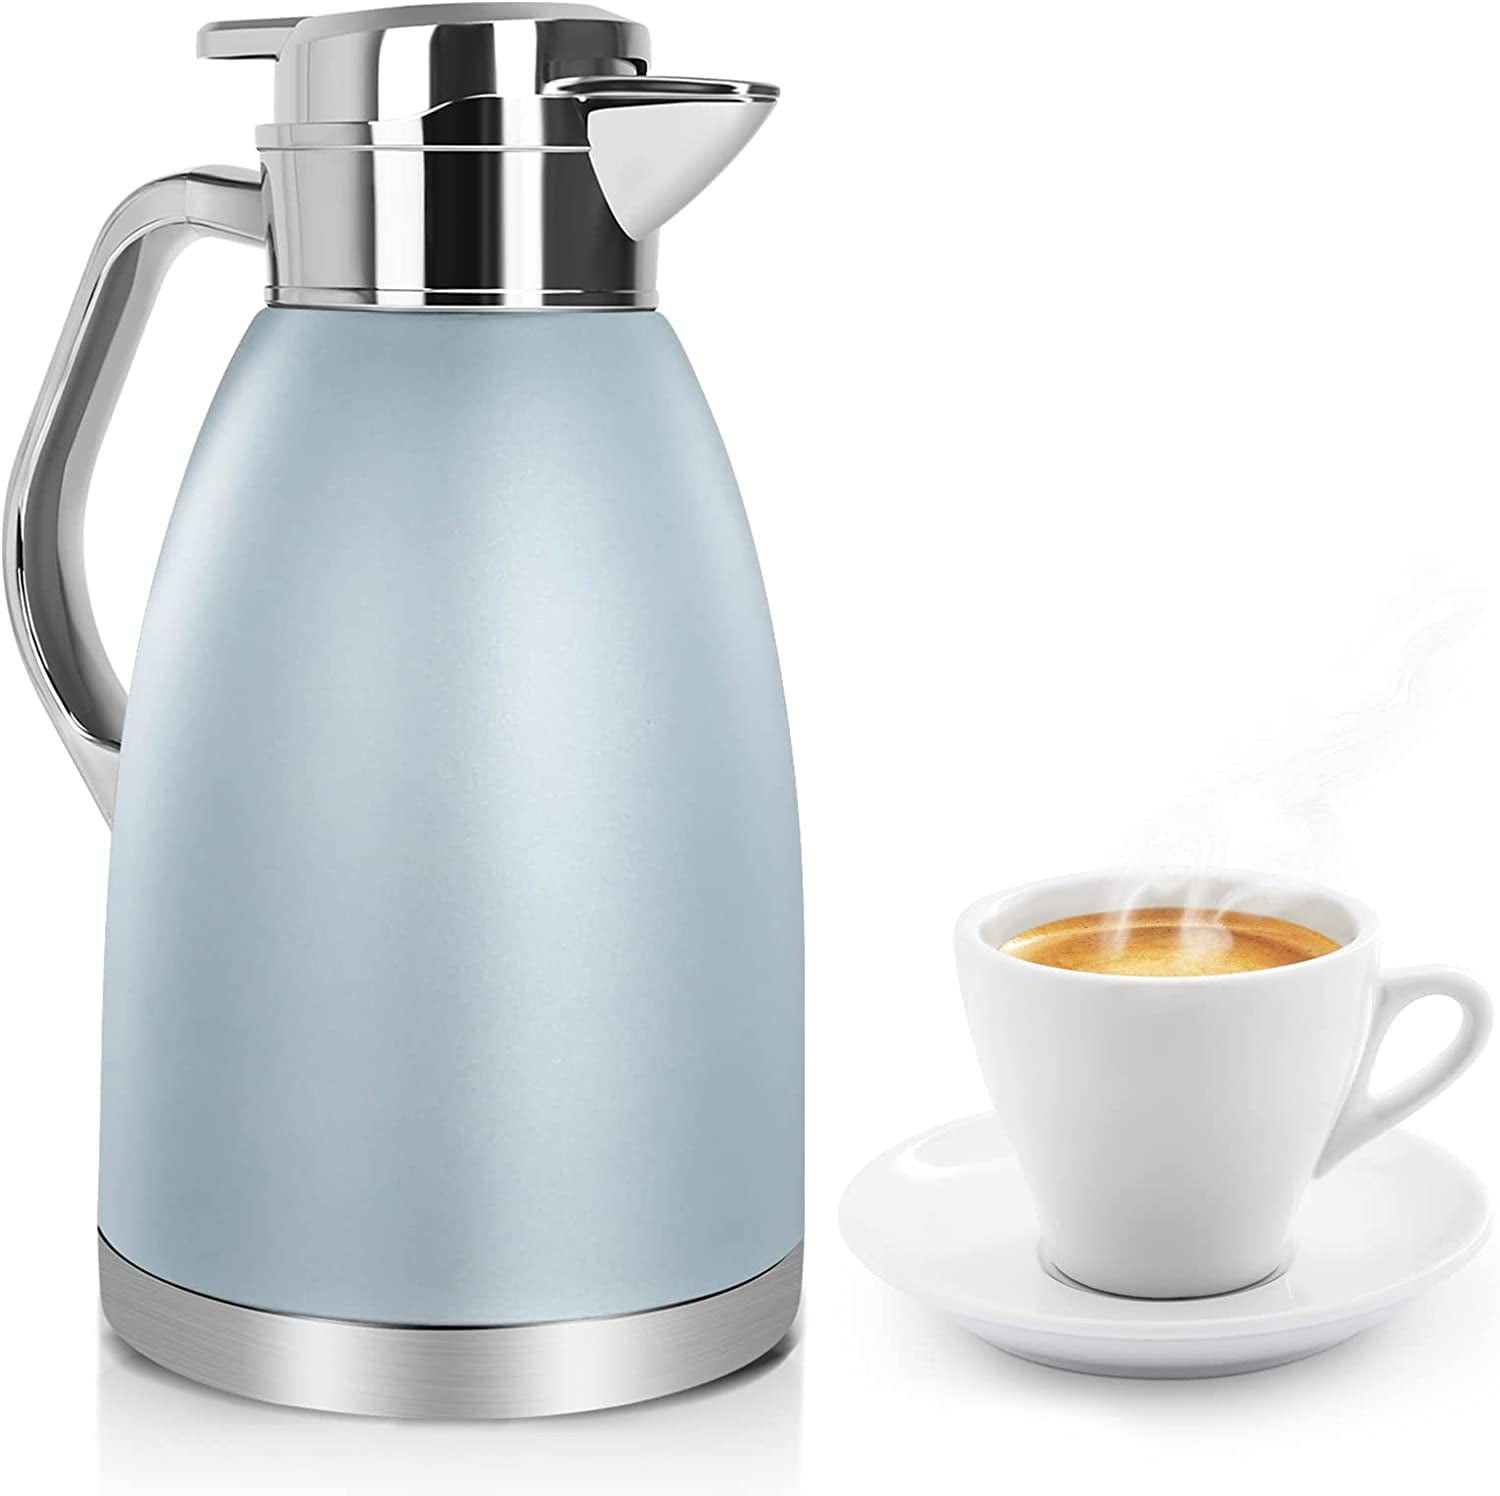 Coffee Thermos Urn Mug Decanter Coffee Pot Cleaning Brush